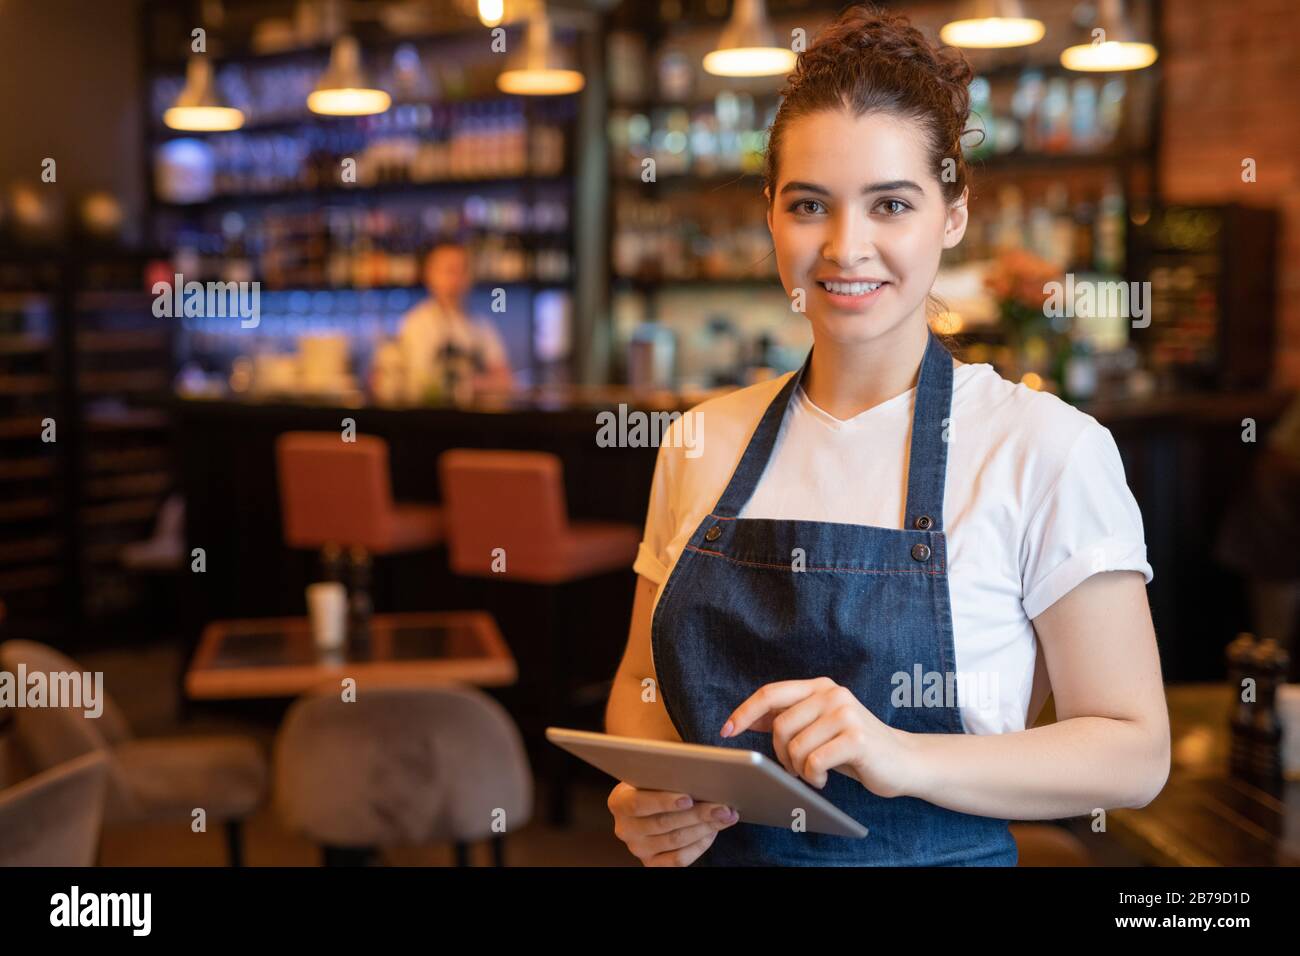 Young smiling waitress in apron and t-shirt standing in front of camera while using touchpad and meeting guests in cafe Stock Photo